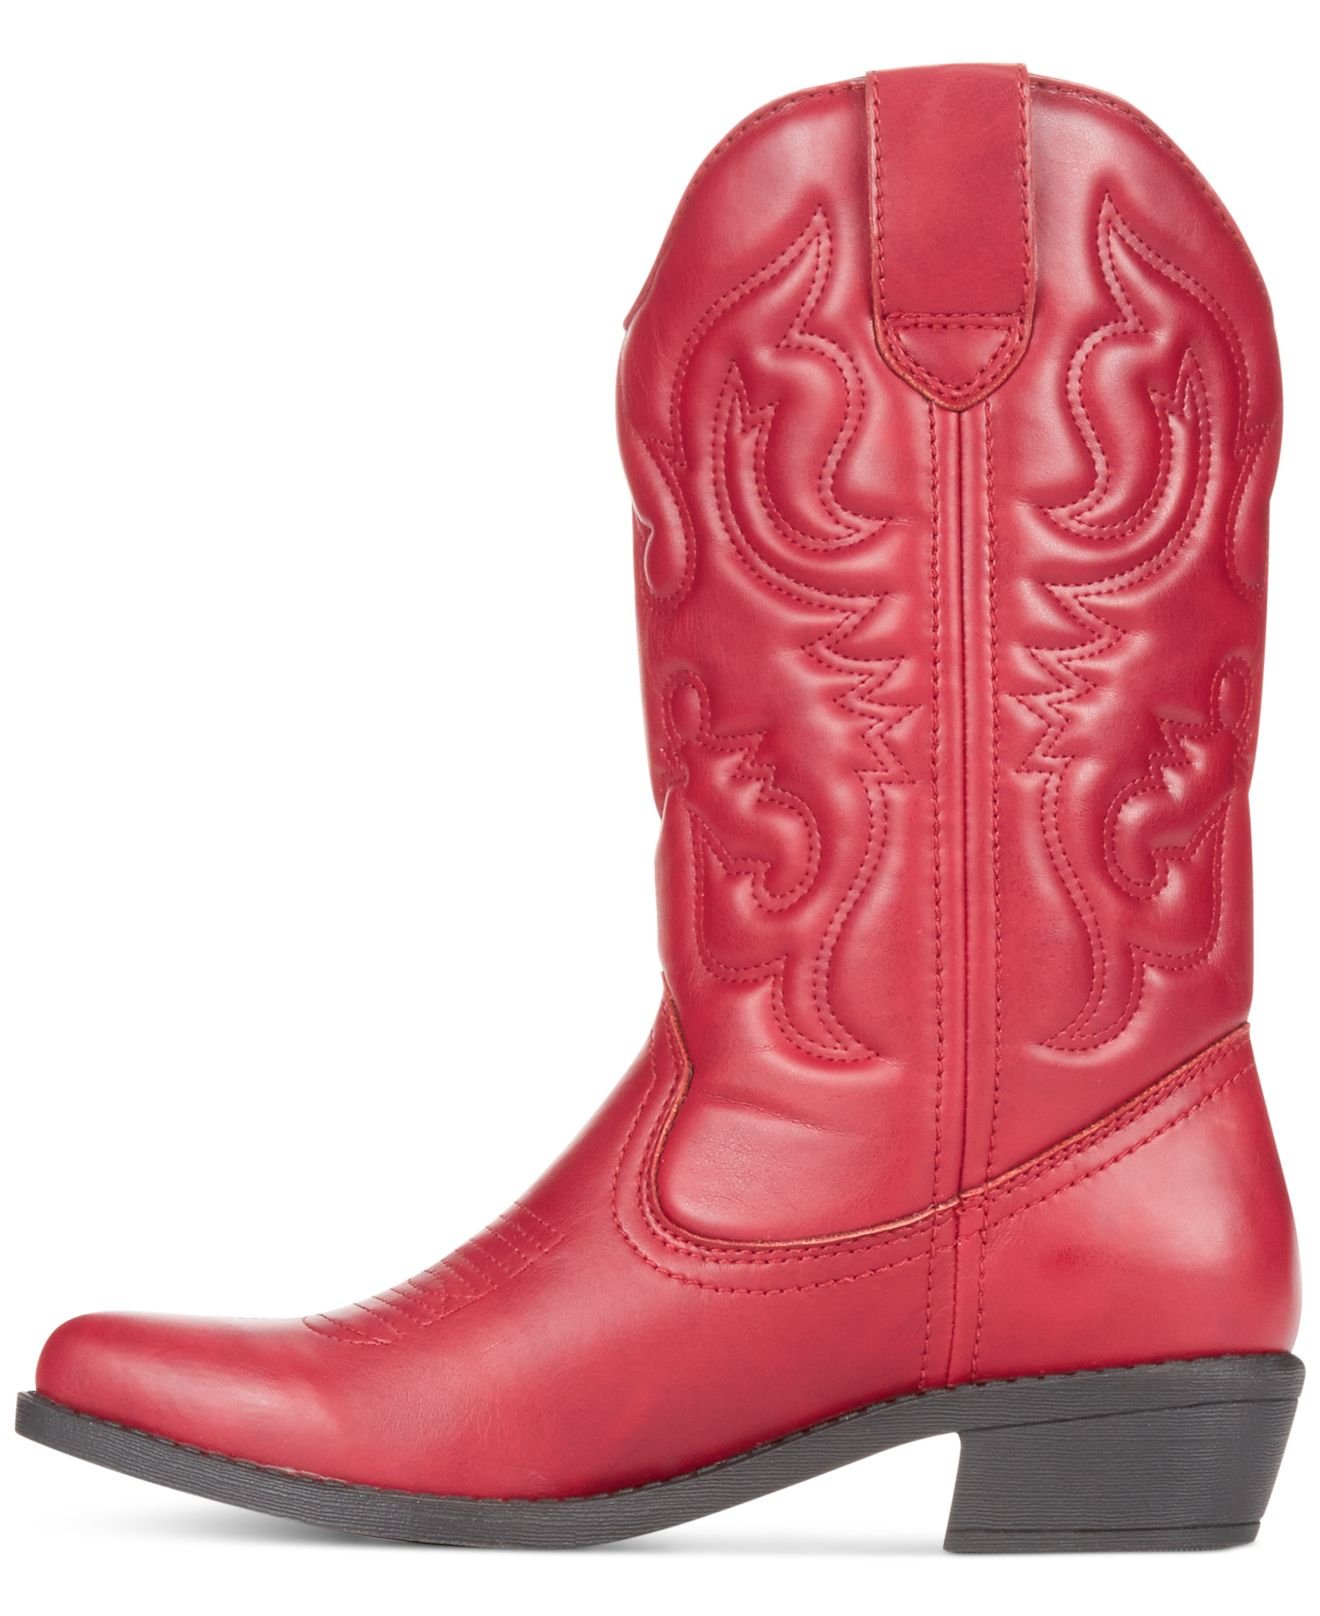 https://cdna.lystit.com/photos/a176-2014/12/02/rampage-red-valiant-cowboy-boots-product-1-20942635-4-013460425-normal.jpeg